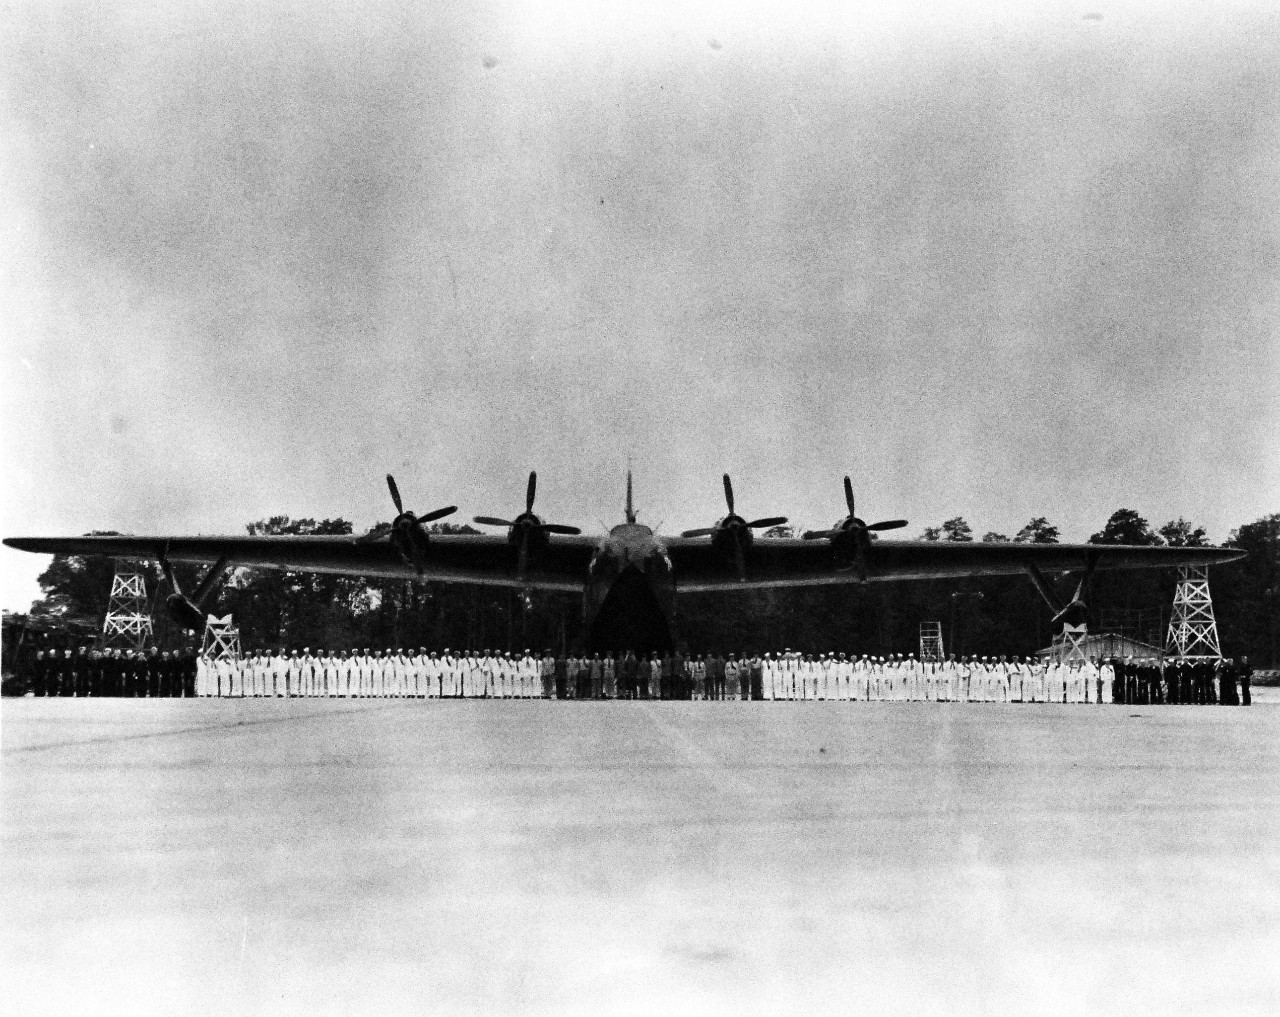 80-G-700052: JRM (Hawaiian Mars, BuNo 76819), July 1945.   The World’s Largest Flying boat which the Glenn L. Martin built for Naval Air Transportation Service (NATS), was launched at conclusion of ceremonies held at the company’s Strawberry Point Seaplane Base. Launching day coincided with the graduation exercises for future flight and ground crews of the new transports officers and men beside plane. Photograph, July 21, 1945. Official U.S. Navy photograph, now in the collections of the National Archives. 